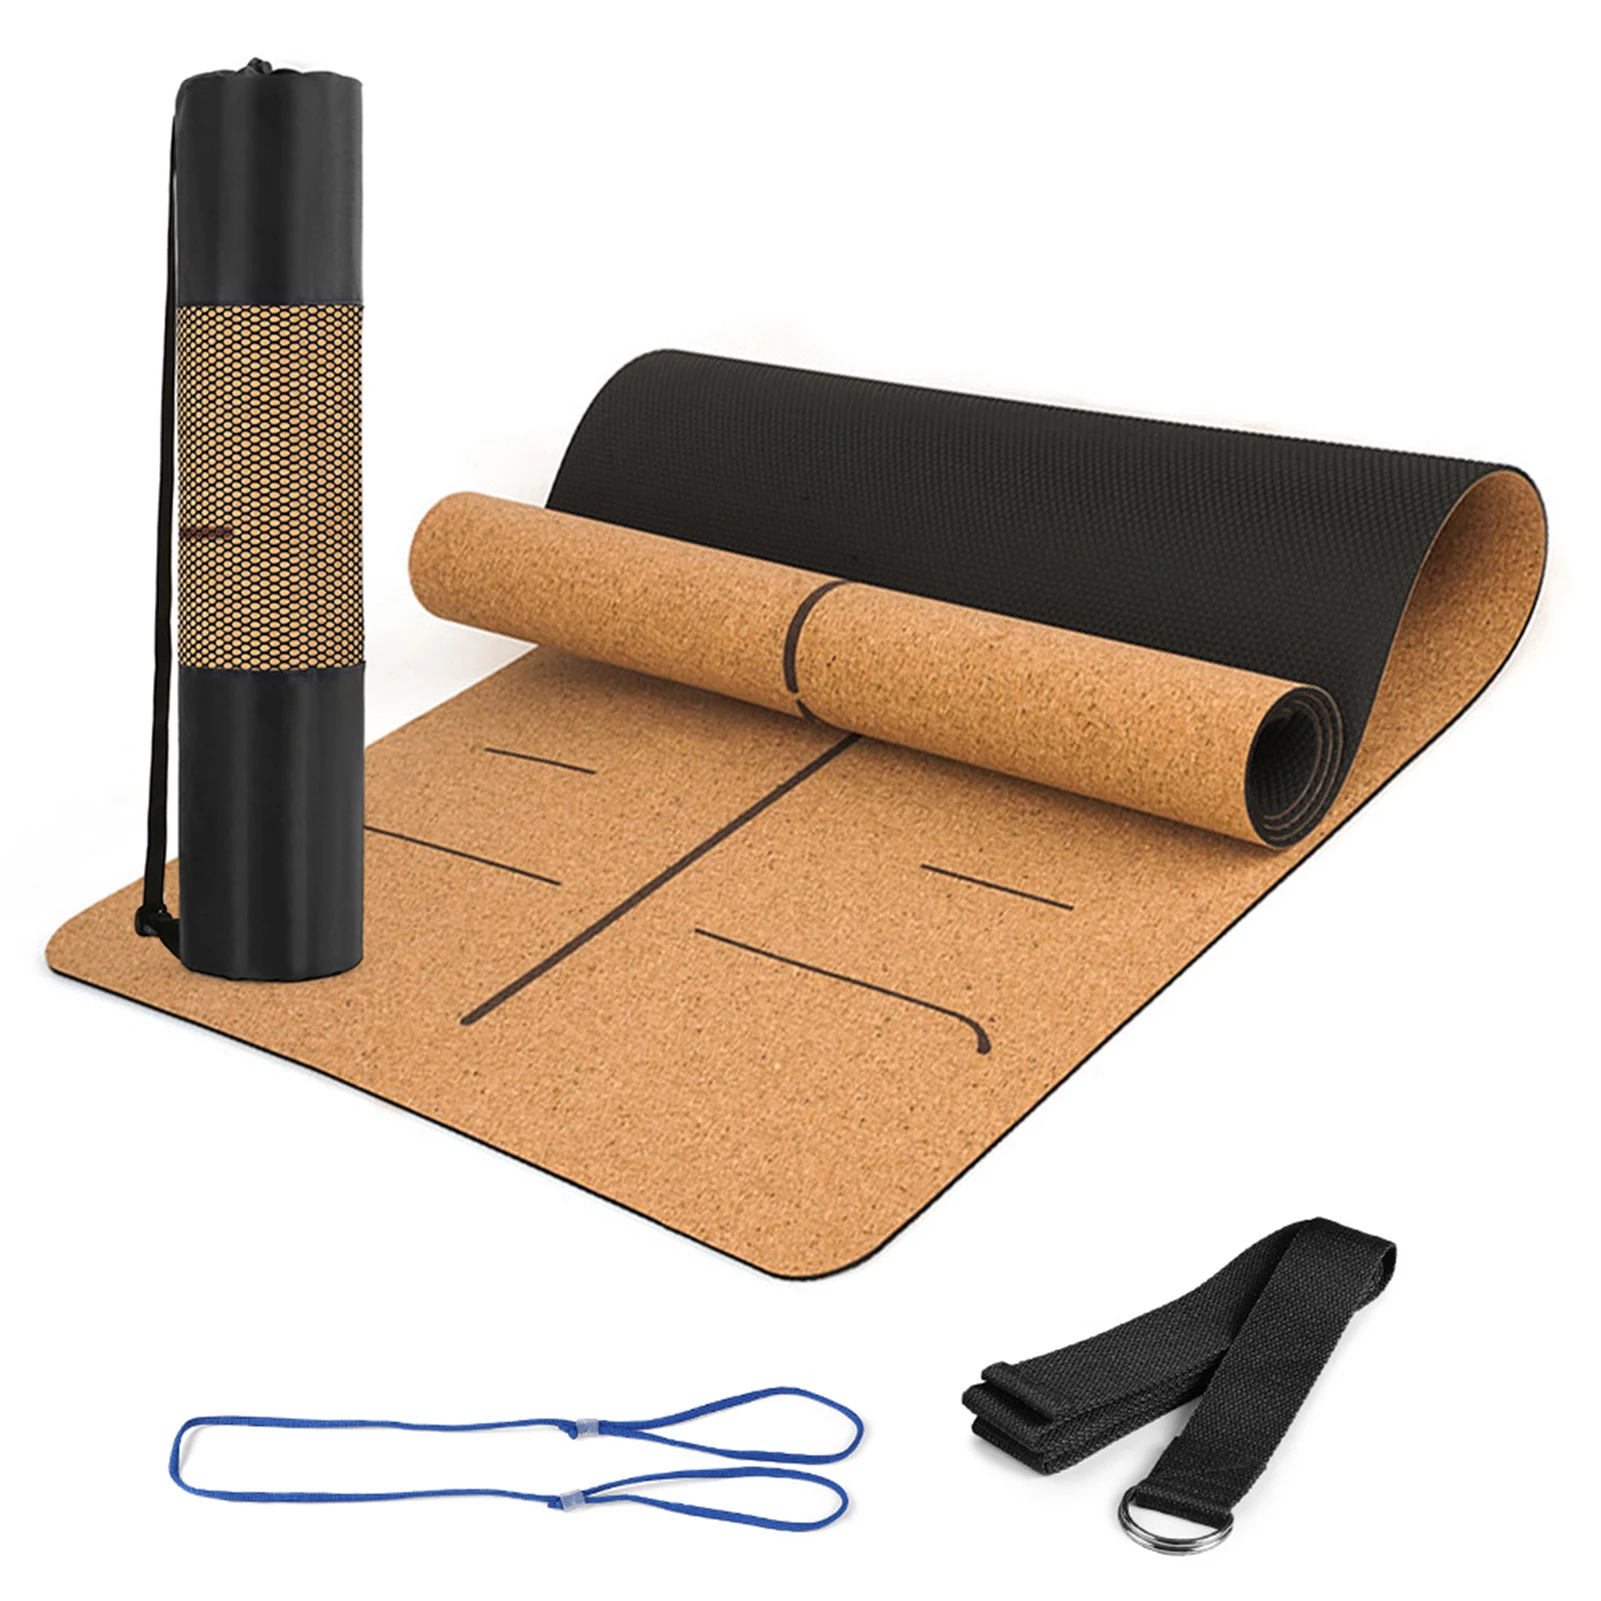 

5mm Thick Non Slip Cork with Yoga Strap Carry Bag for Pilates Gymnastics Exercise Fitness Mat Pad